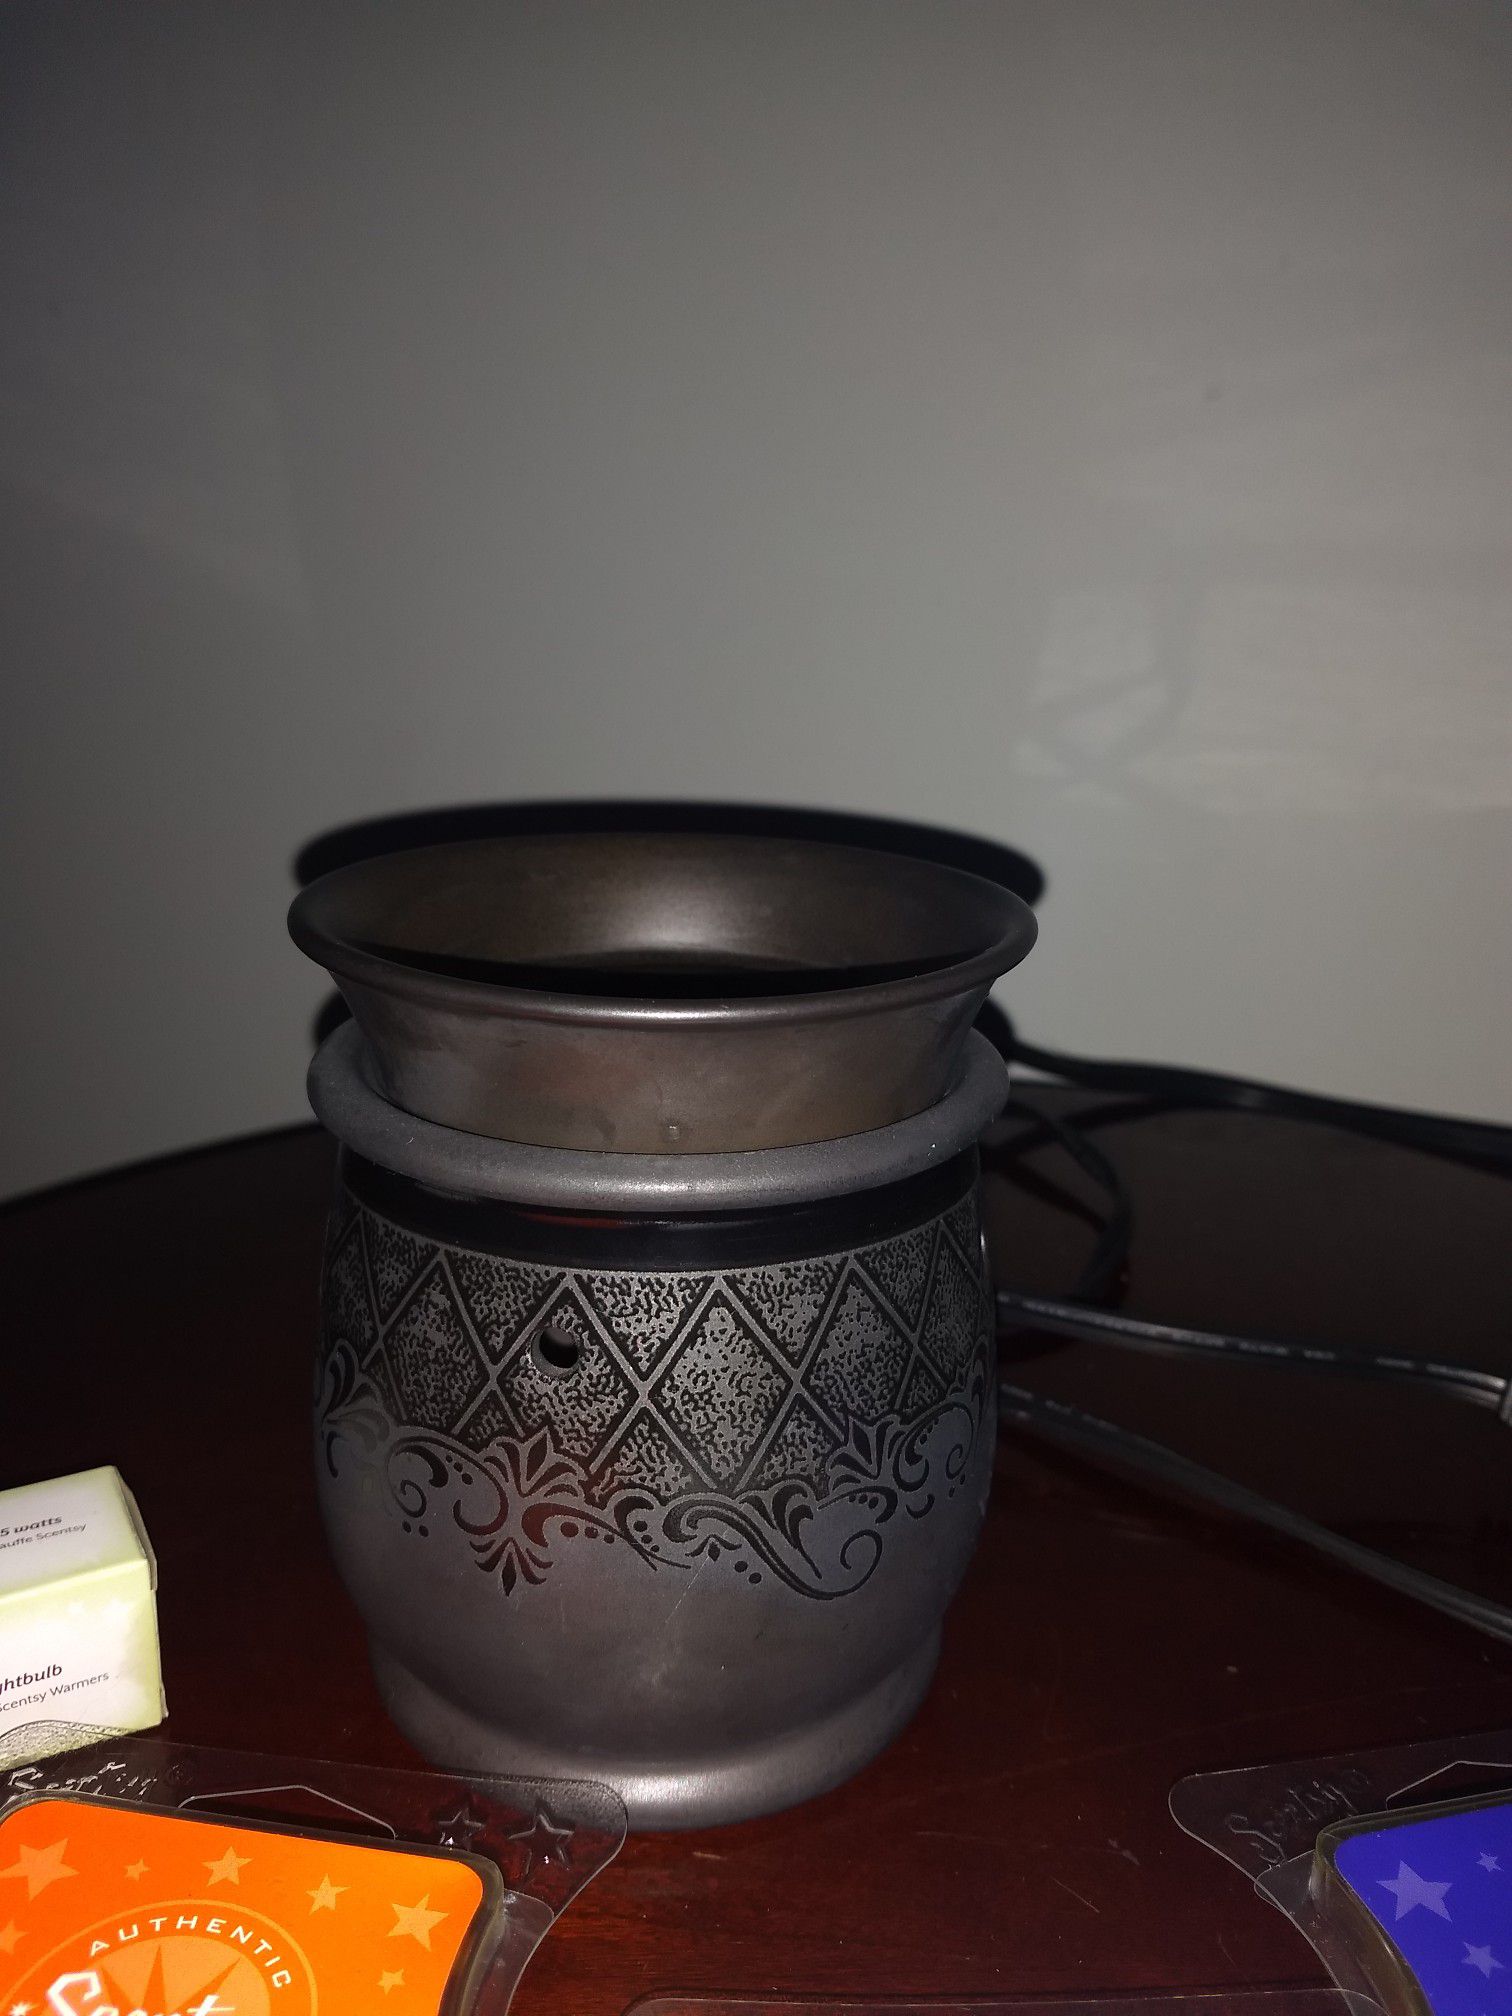 Scentsy warmer and wax